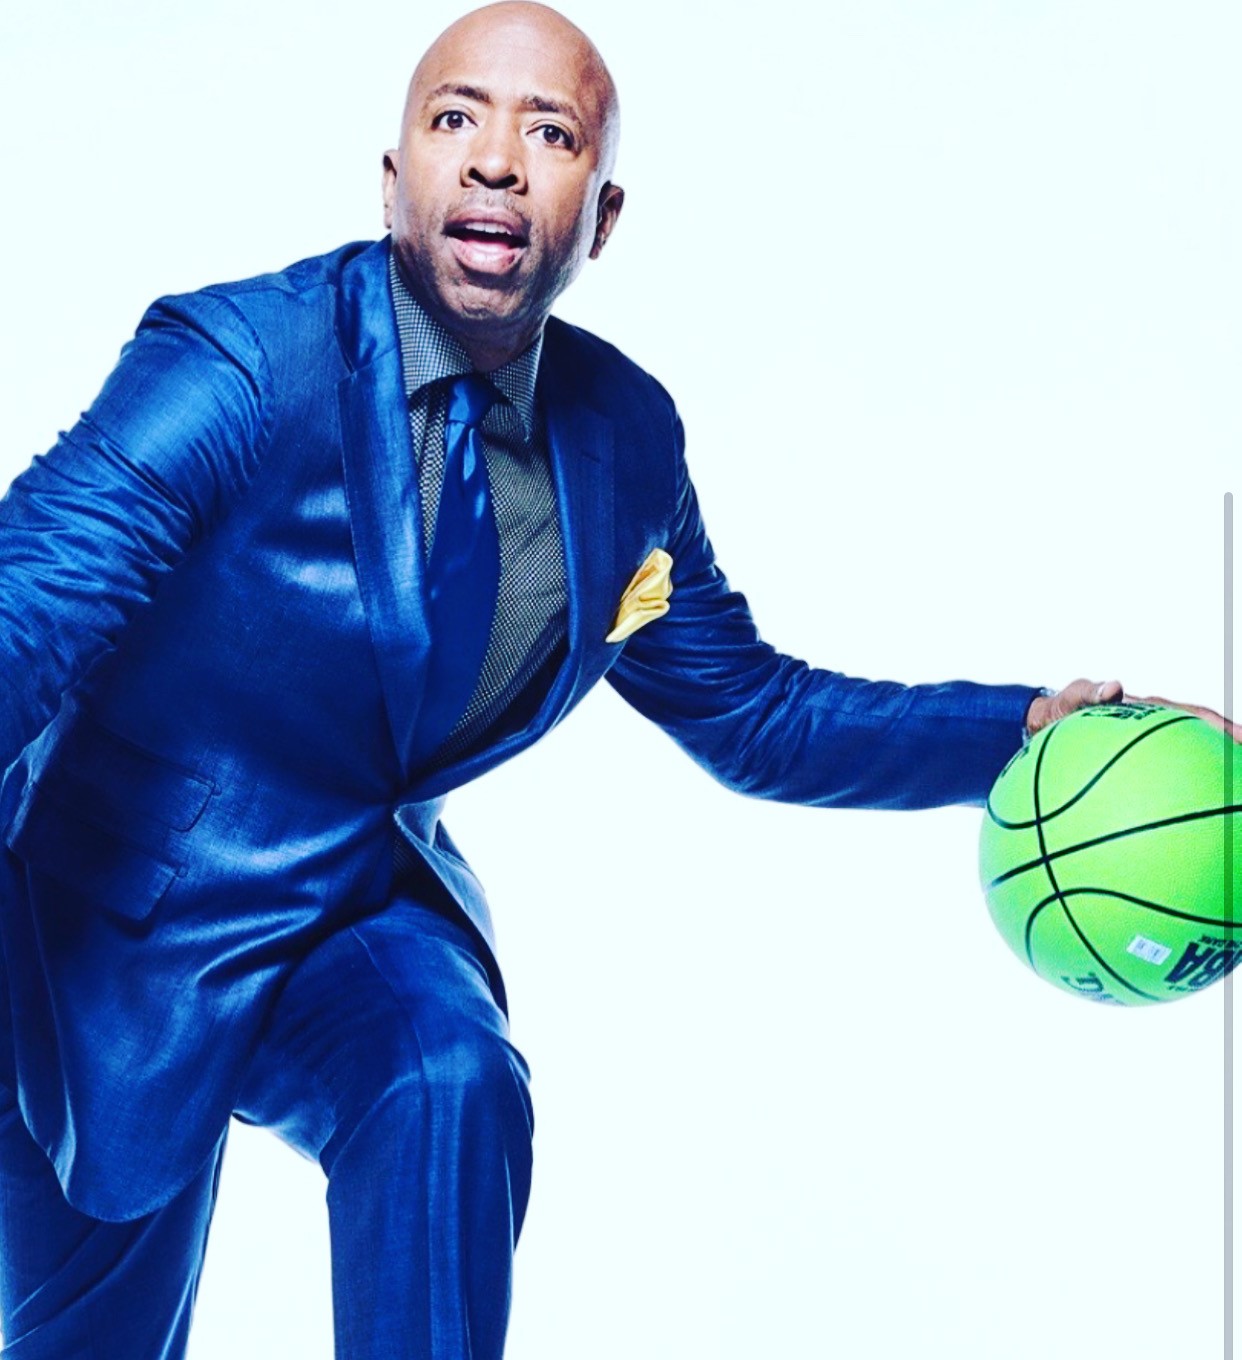 Kenny Smith on Instagram: There's nothing quite like college basketball in  March! KJ and I had the chance to visit UNC with @Bojangles and get  students hyped about the ACC tournament. It's